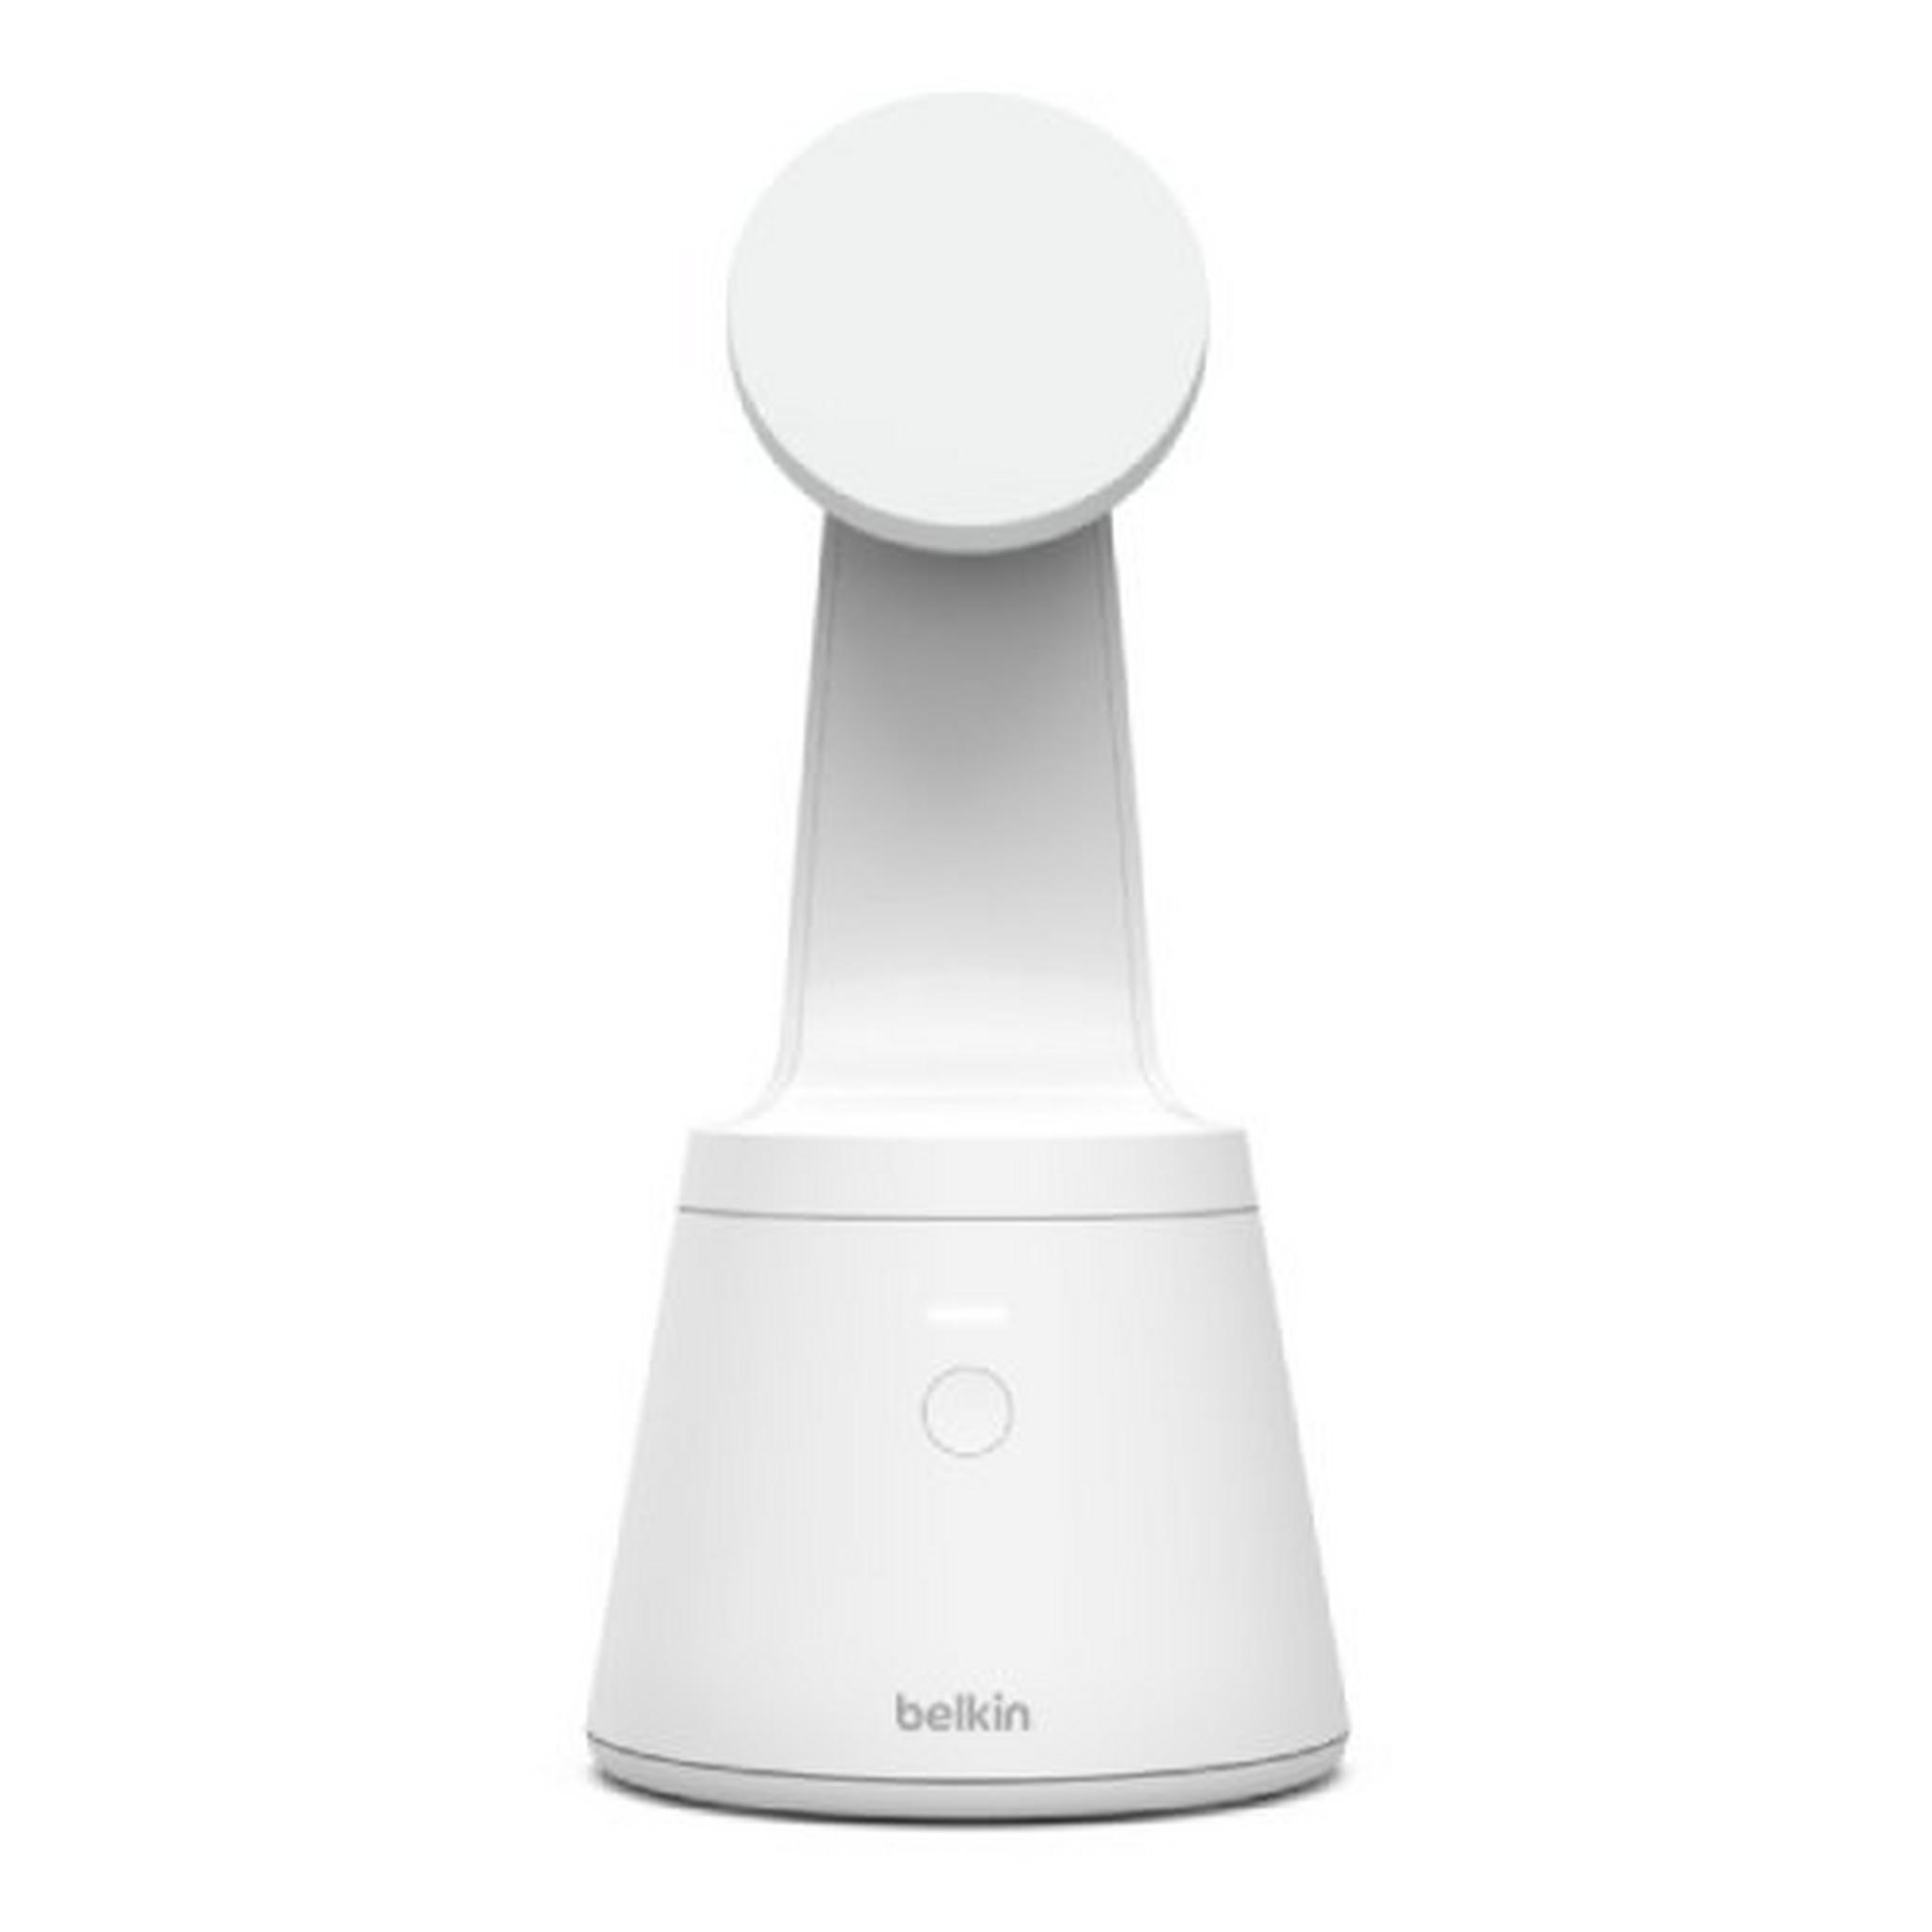 Belkin Magnetic Face Recognition Stand for iPhone 12 (MA001B-360) - White